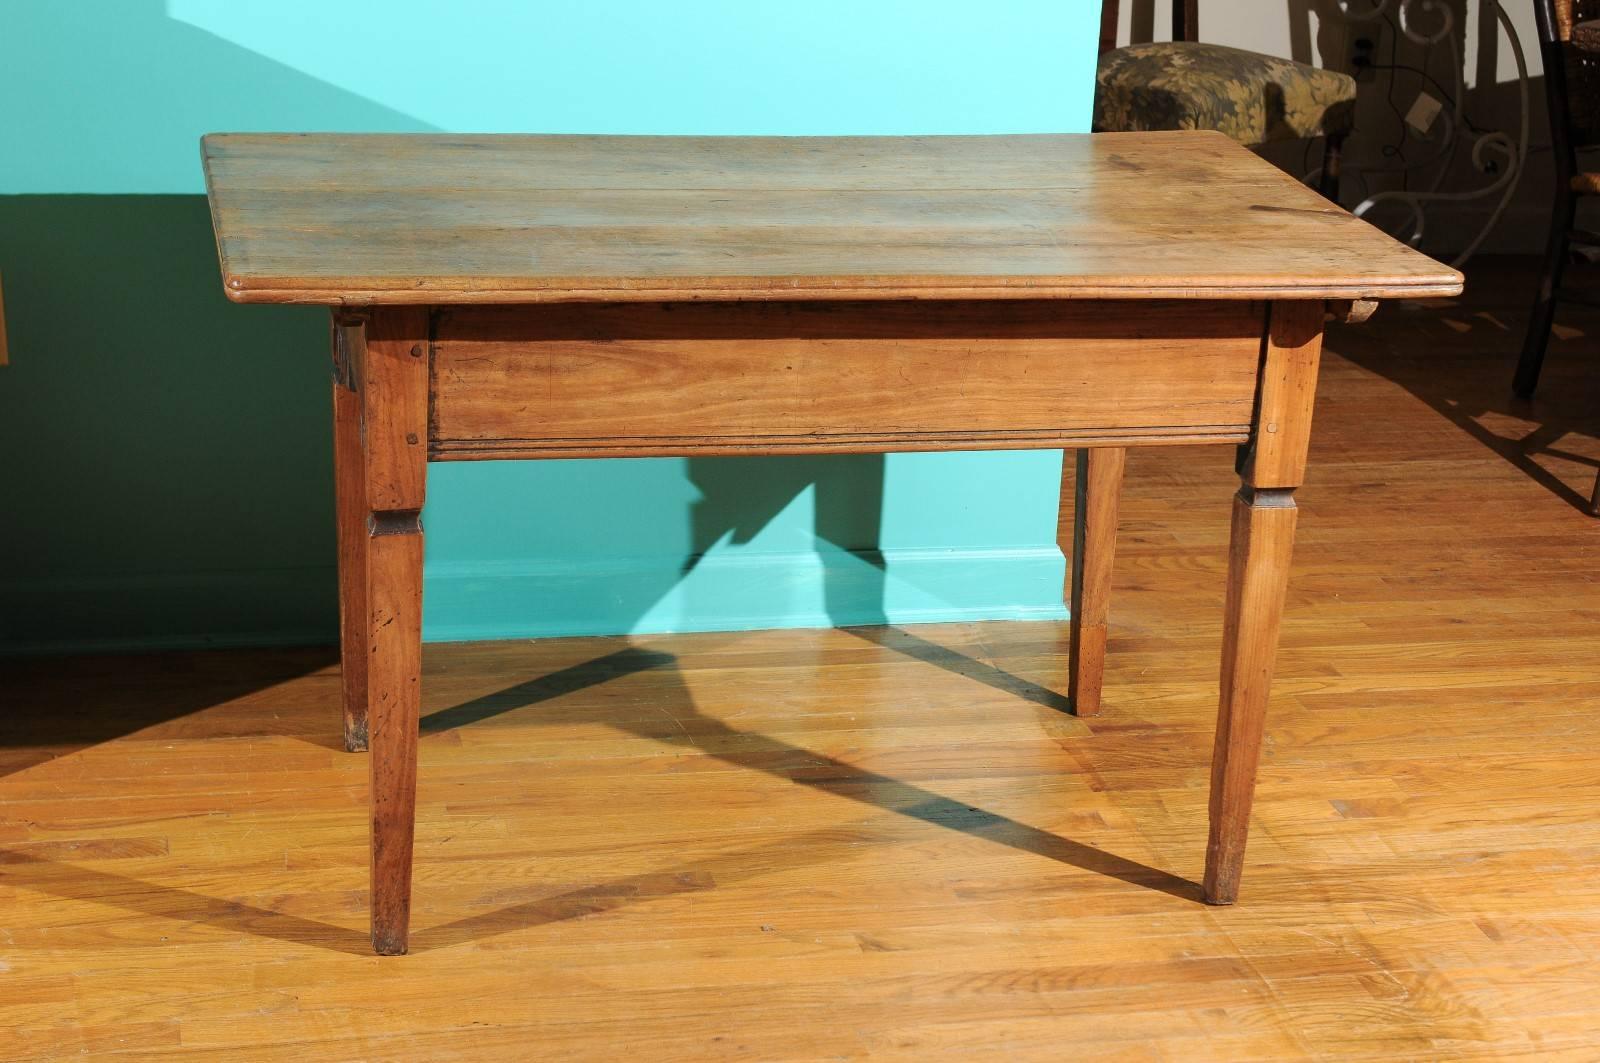 Hand-Crafted Eastern European Side Table, Mid-19th Century For Sale